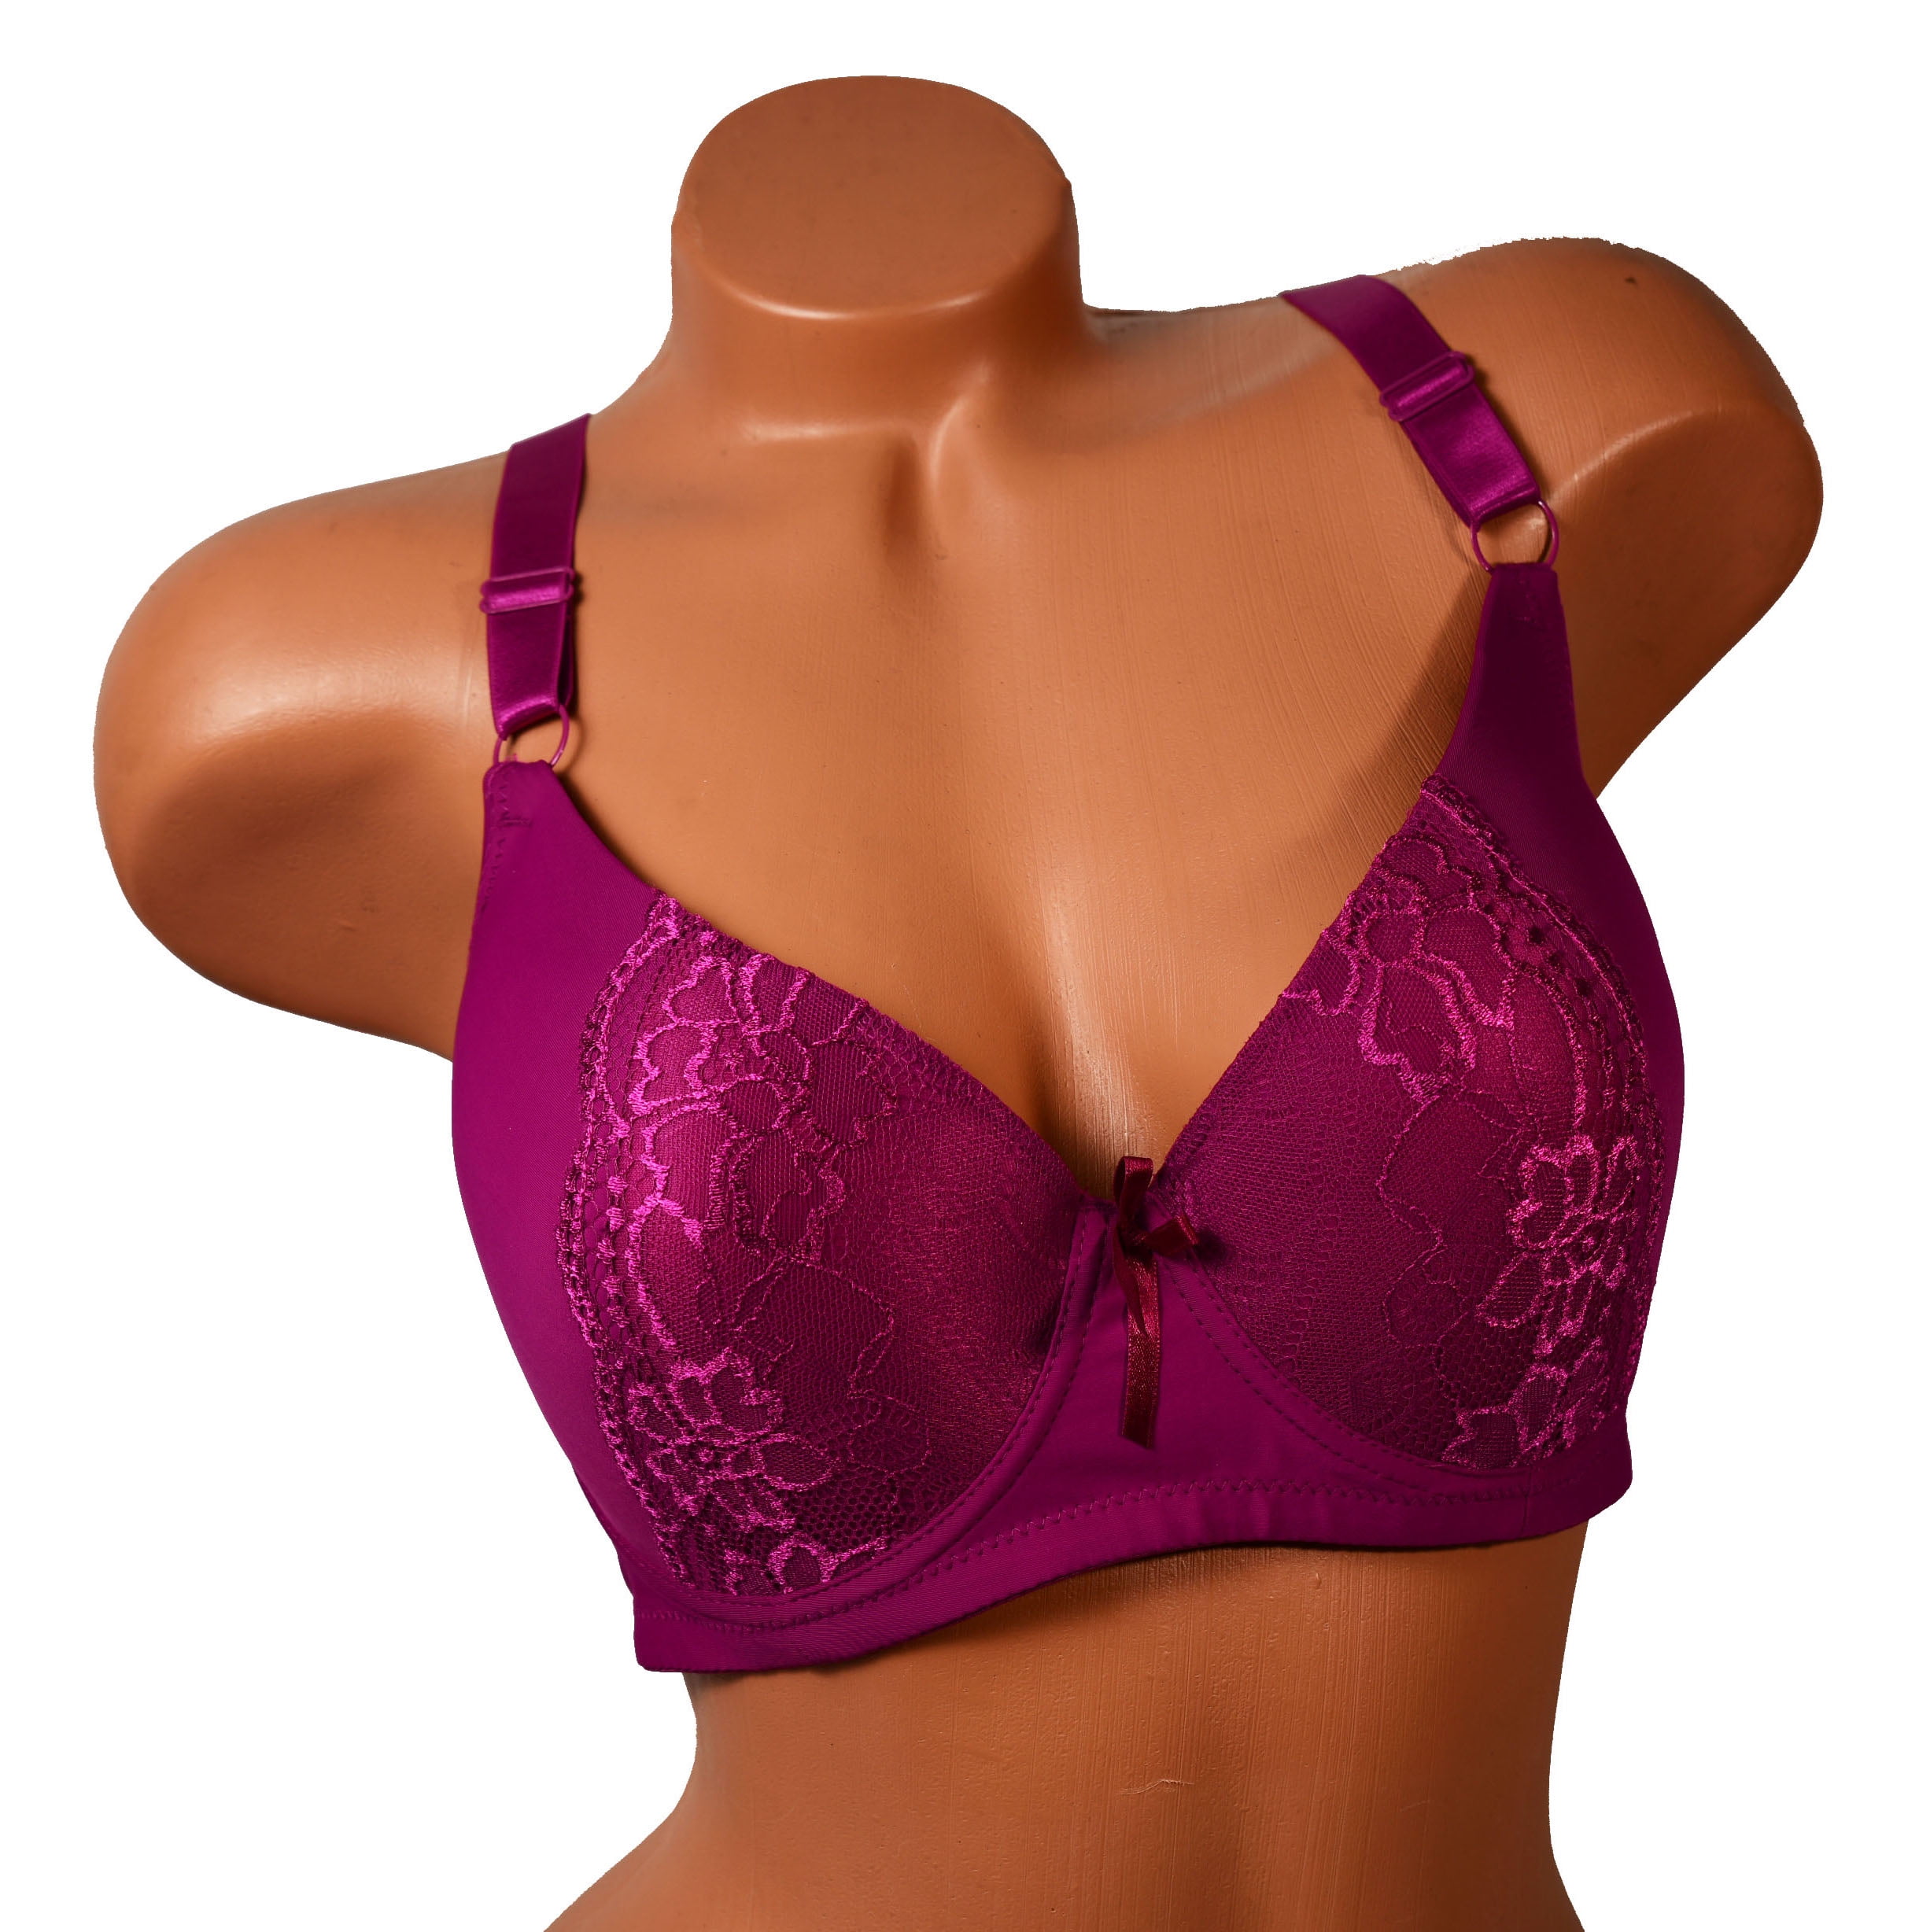 6 Pack of Women's Bras - D to DDD Cup Sizes - Size UK